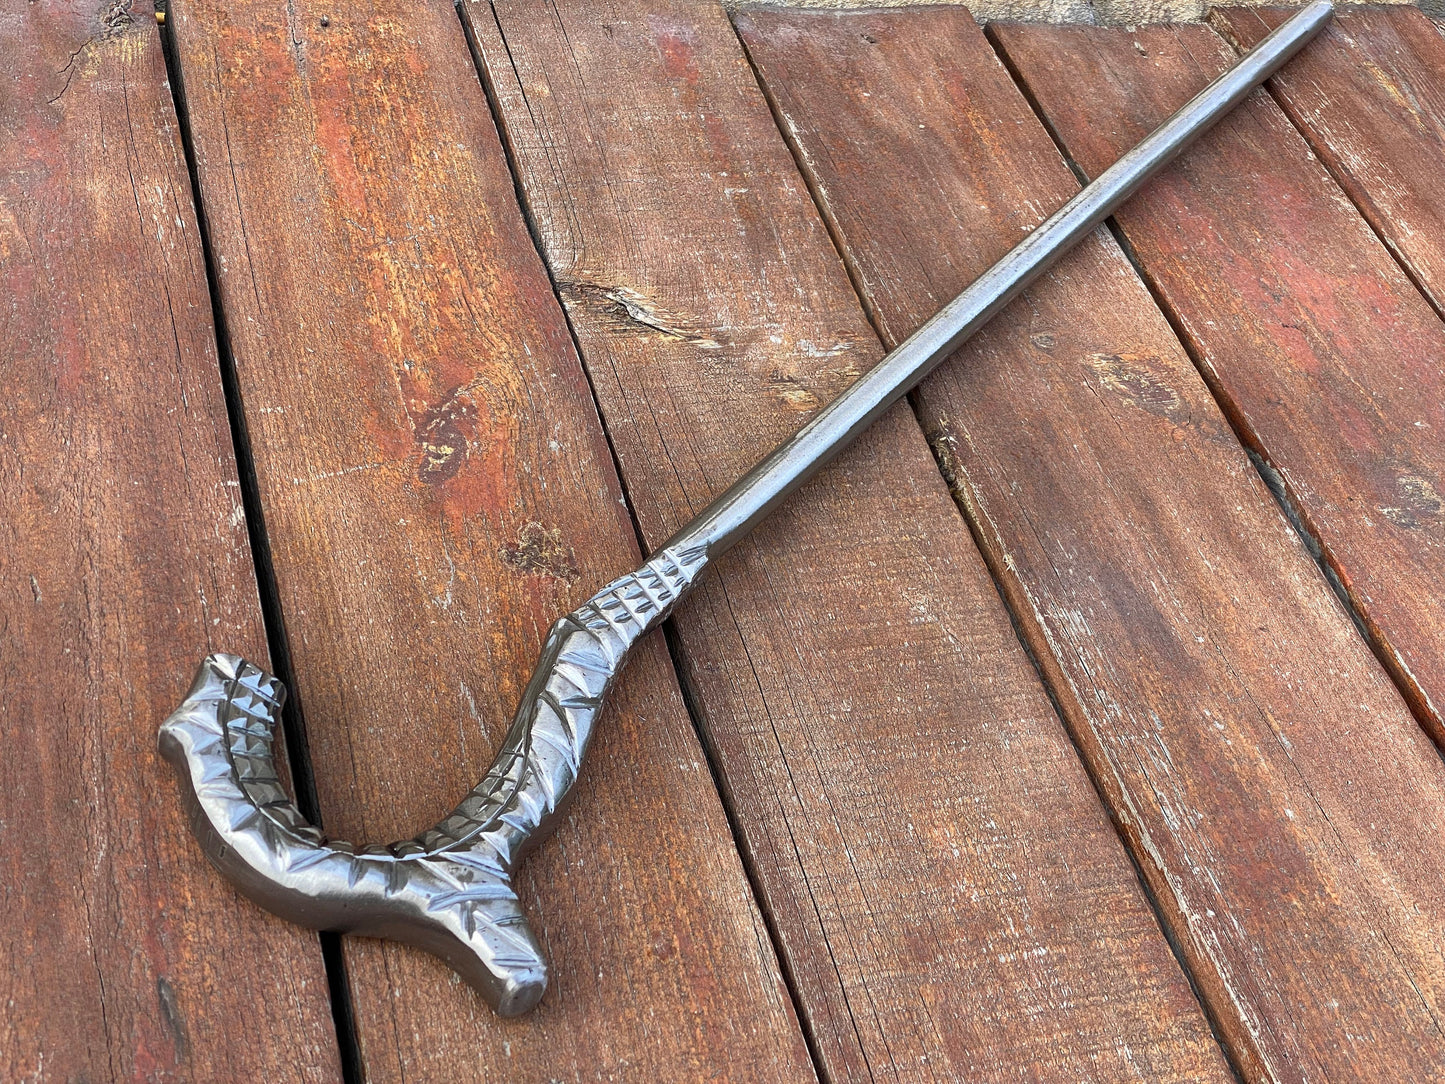 Cane, walking cane, walking stick, personalized cane, birthday, Christmas, anniversary, retirement gift, pension, stave, traveling, grandpa